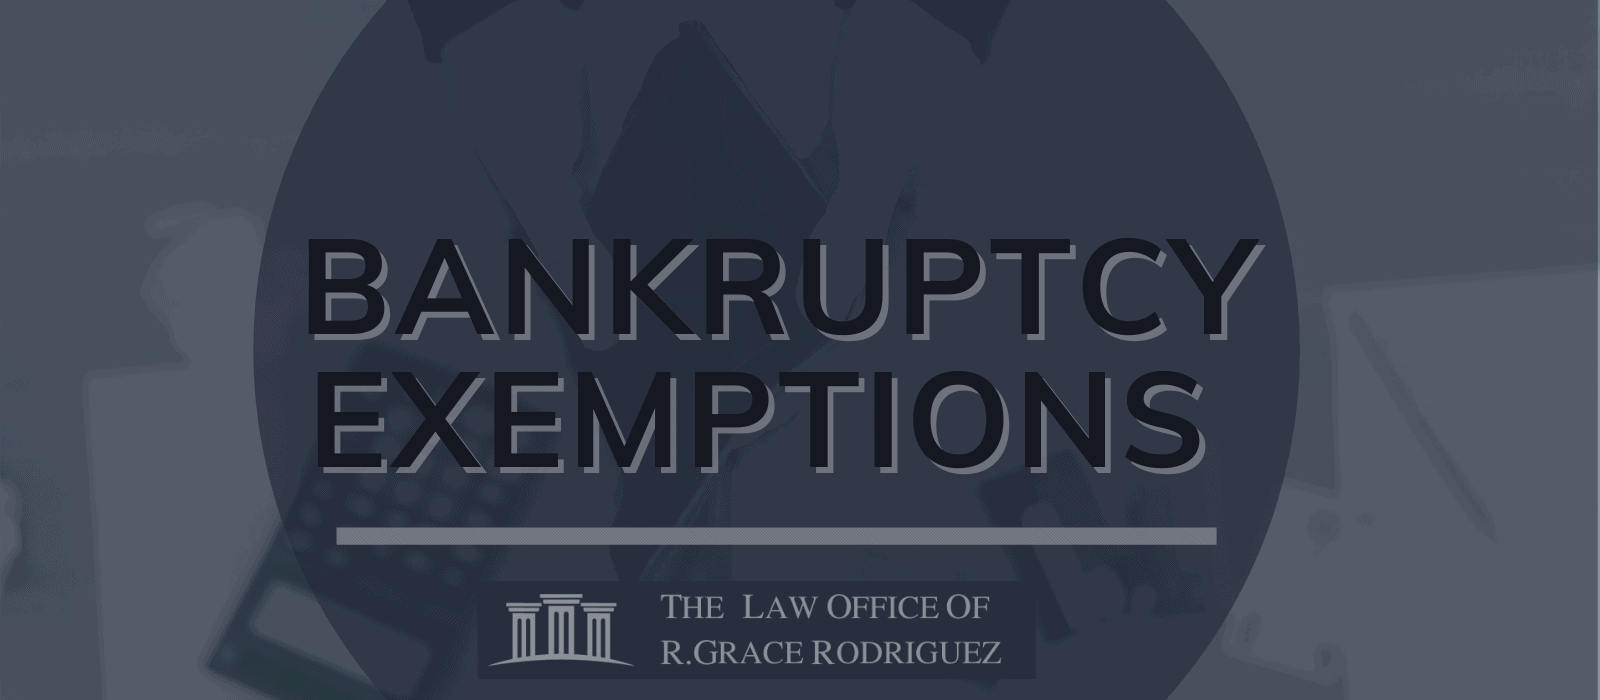 Bankruptcy Exemptions an Overview The Law Offices of R. Grace Rodriguez